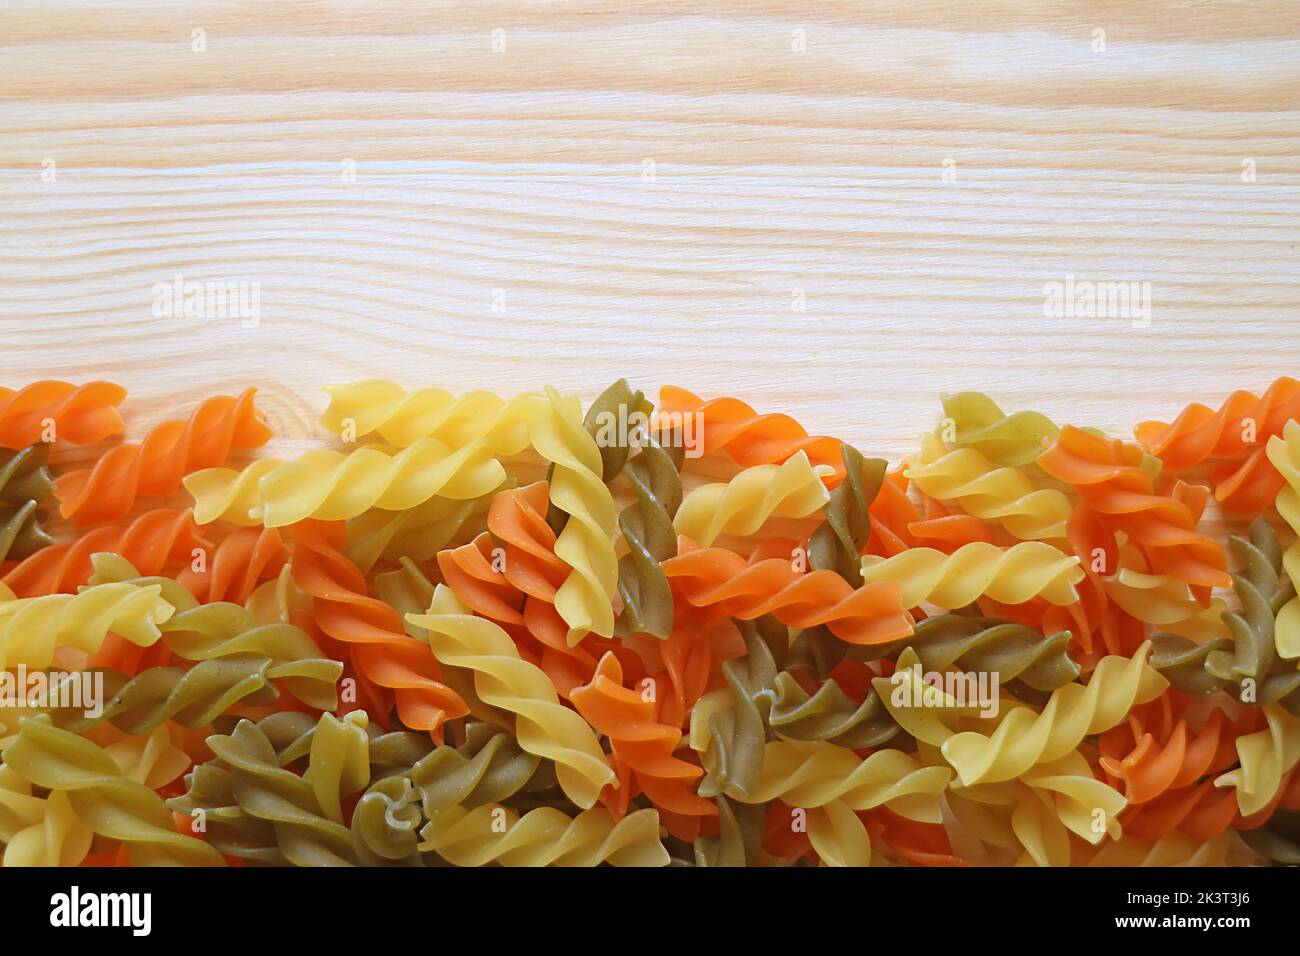 Heap of Vegeroni spiral shaped three-color fusilli pasta on wooden background Stock Photo